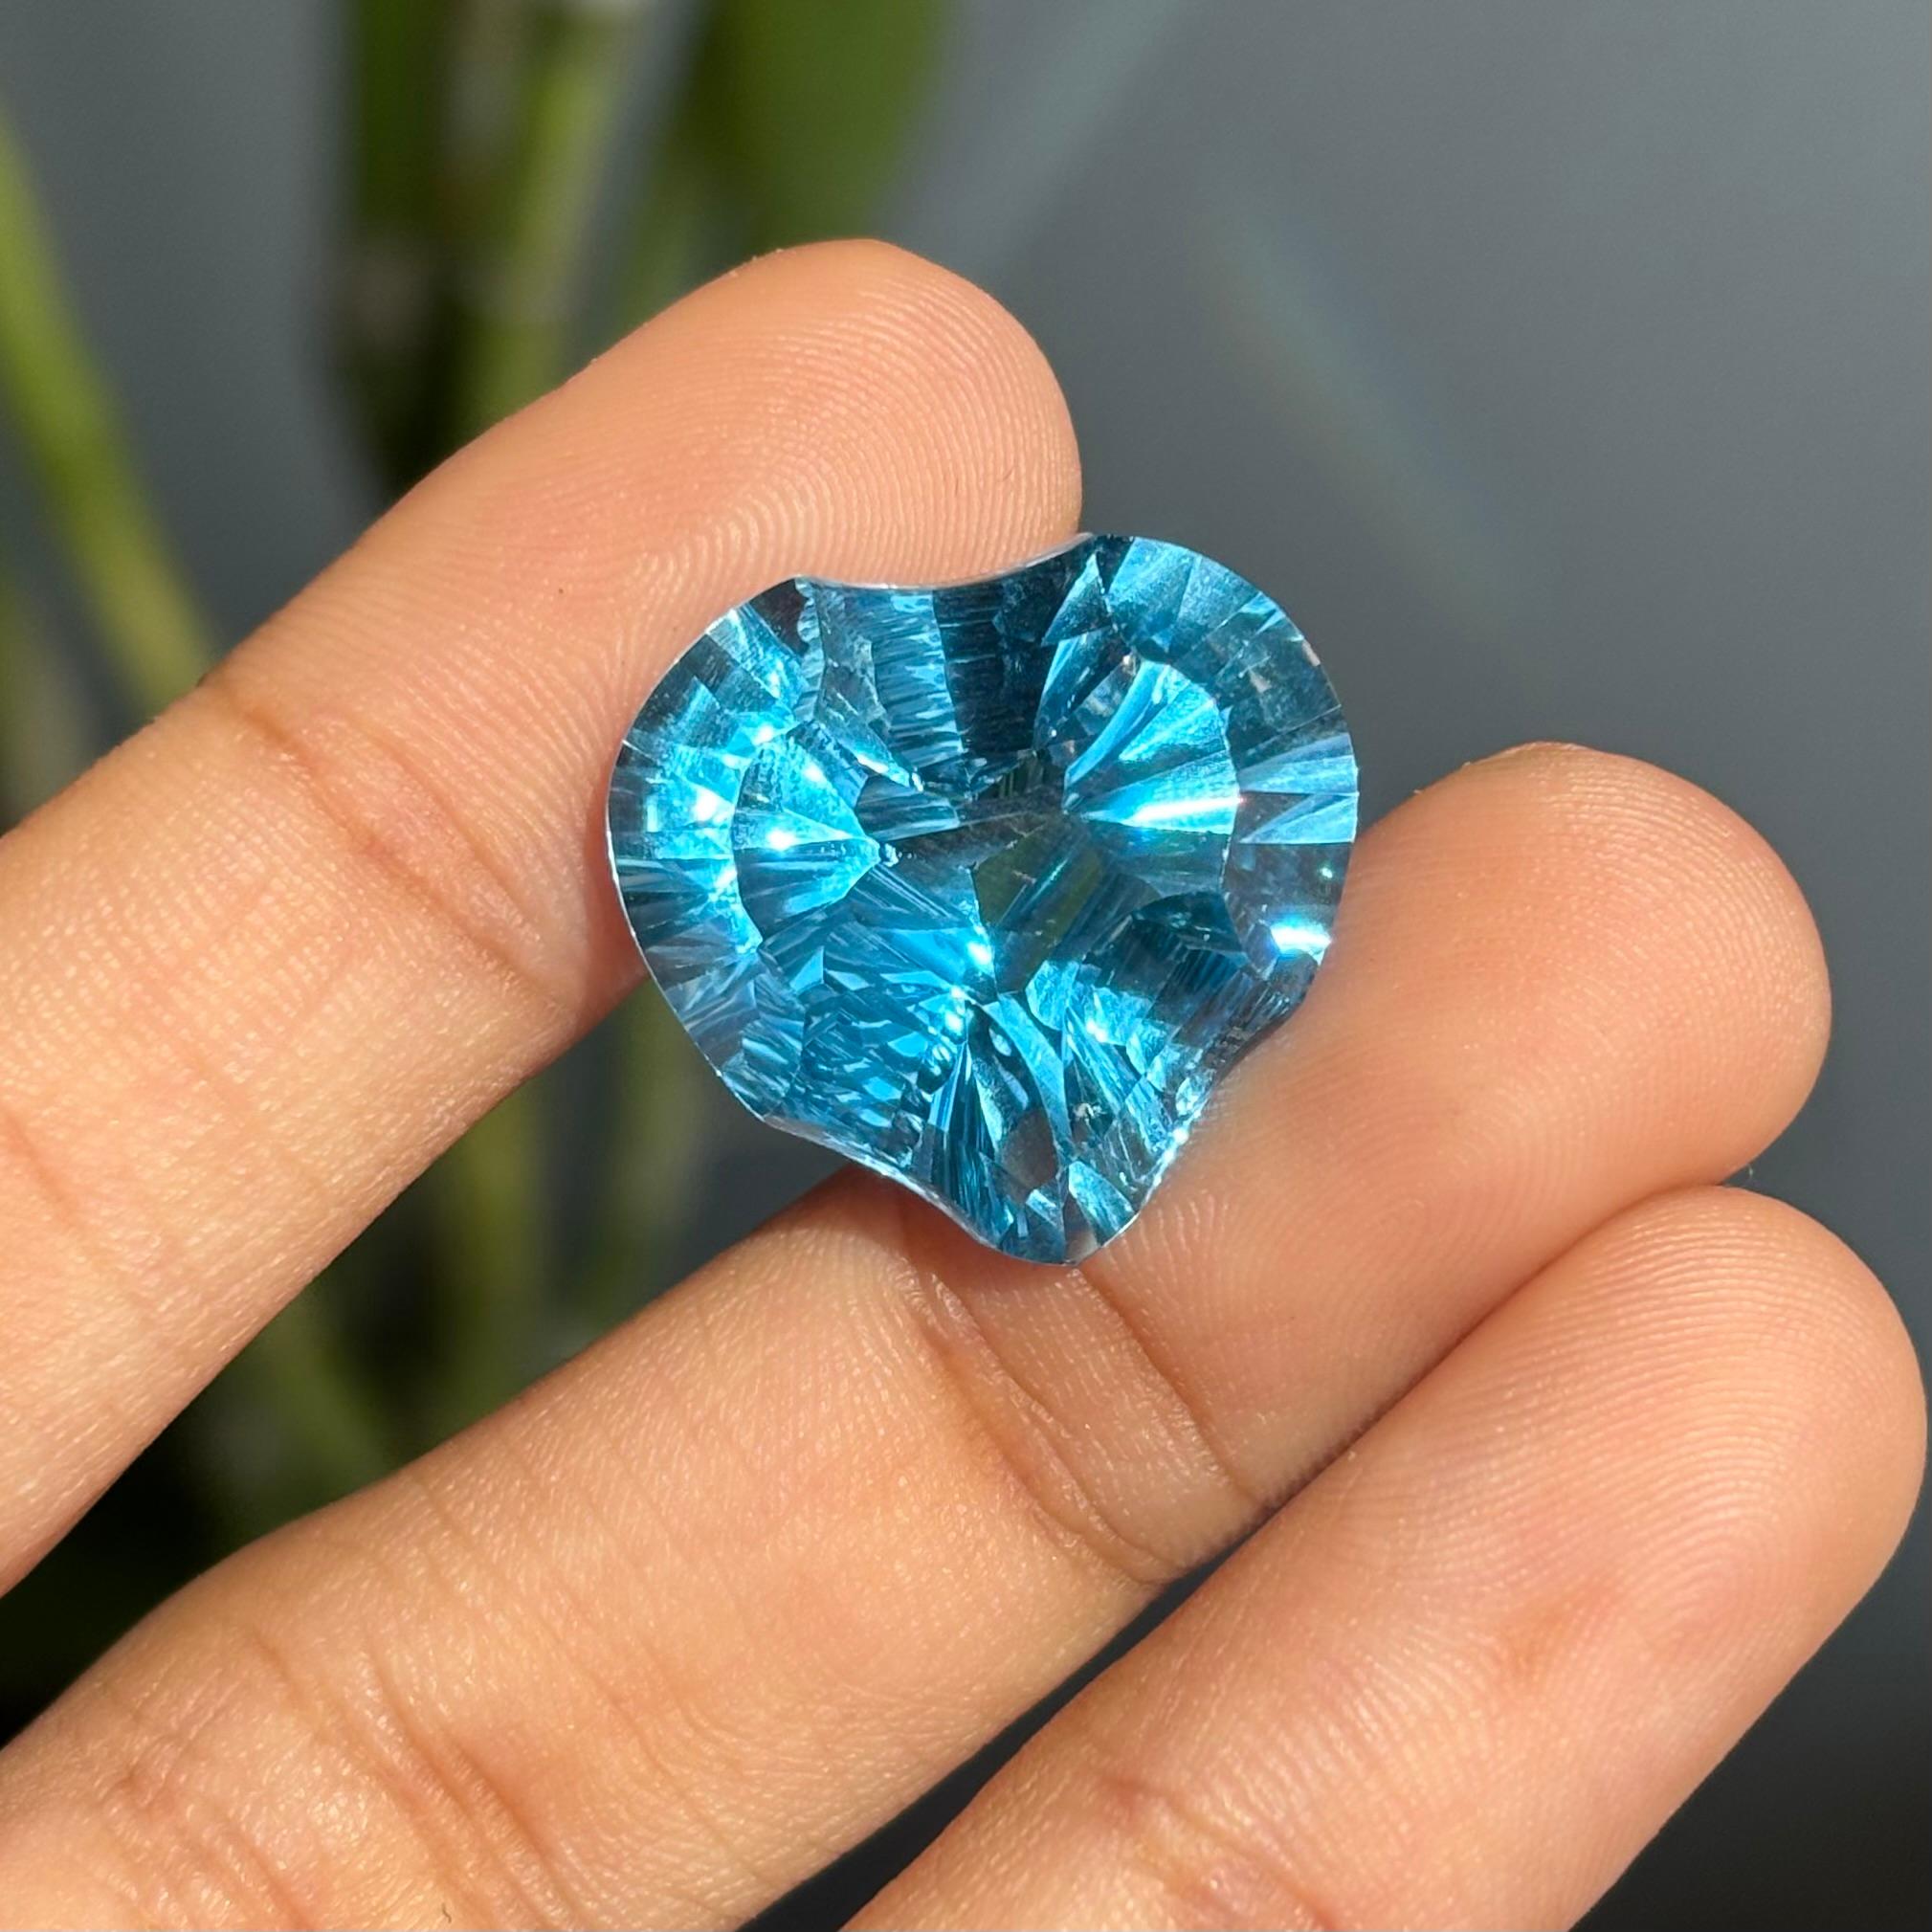 24.12 Carat Natural Blue Heart Shaped Topaz Stone For Sale 3